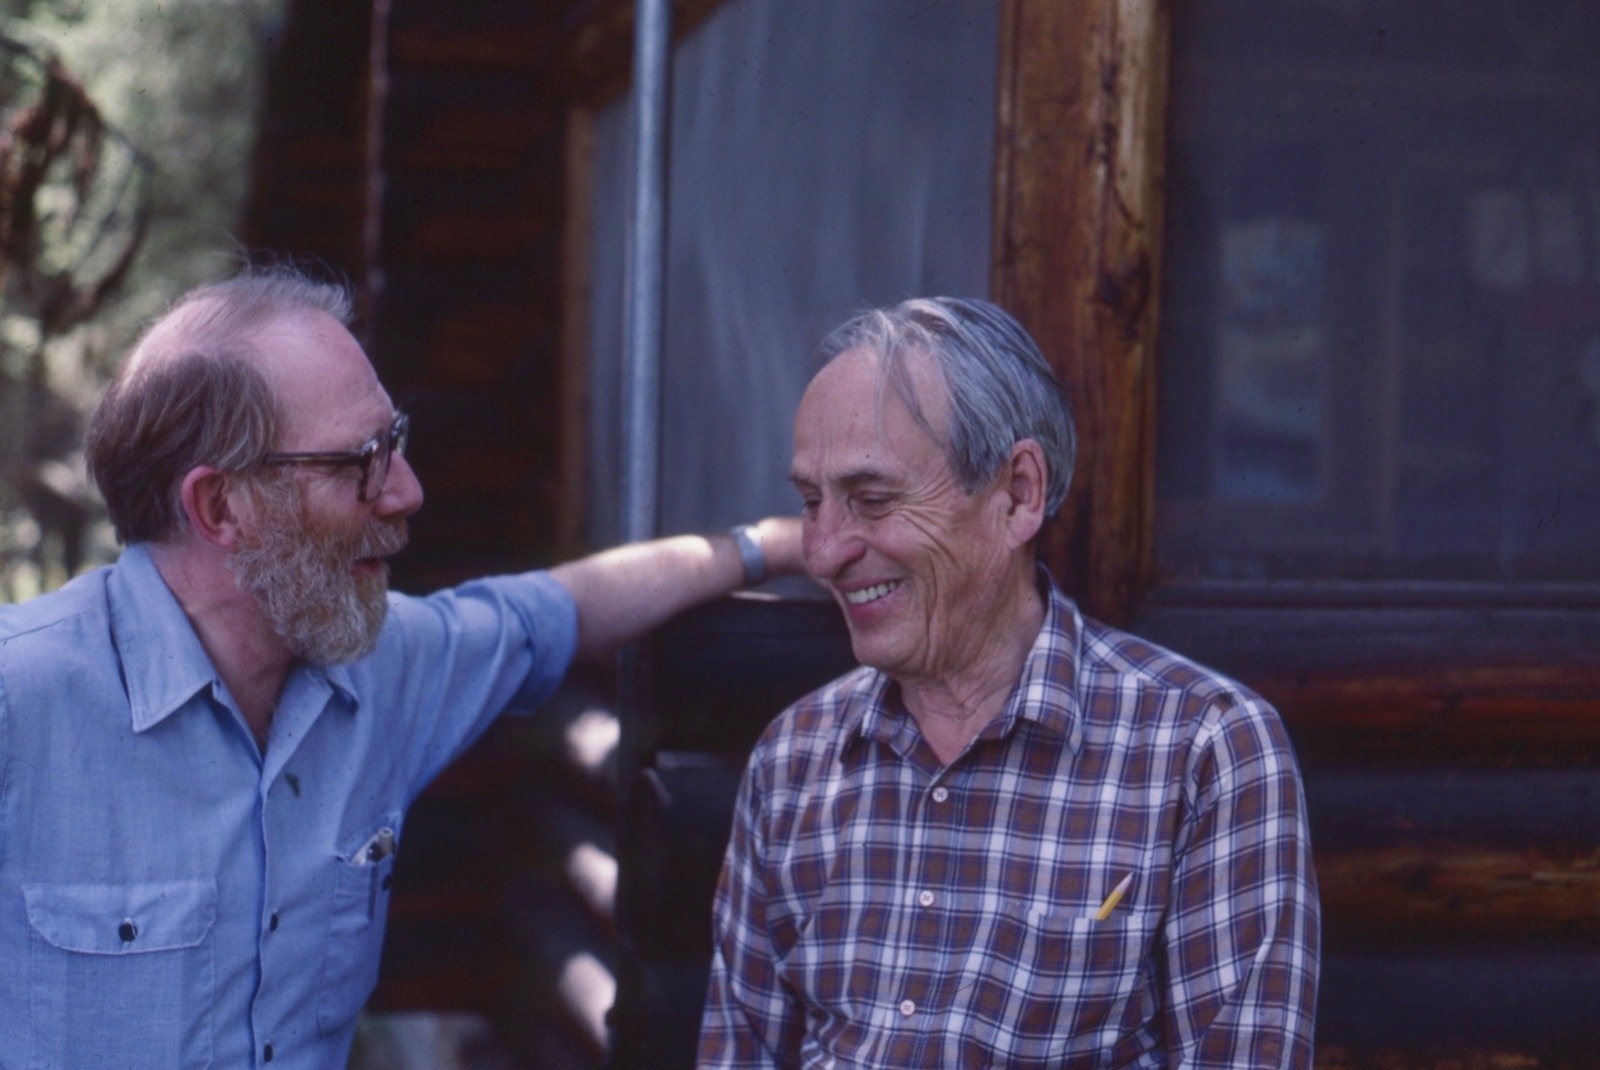 Doig and good friend, the late Norman Maclean, the Montana-born writer best known for his novella "A River Runs Through It" (also turned into a movie adaptation produced by Robert Redford) and "Young Men and Fire."  Photo by Carol Doig,  courtesy MSU Library Ivan Doig Collection 